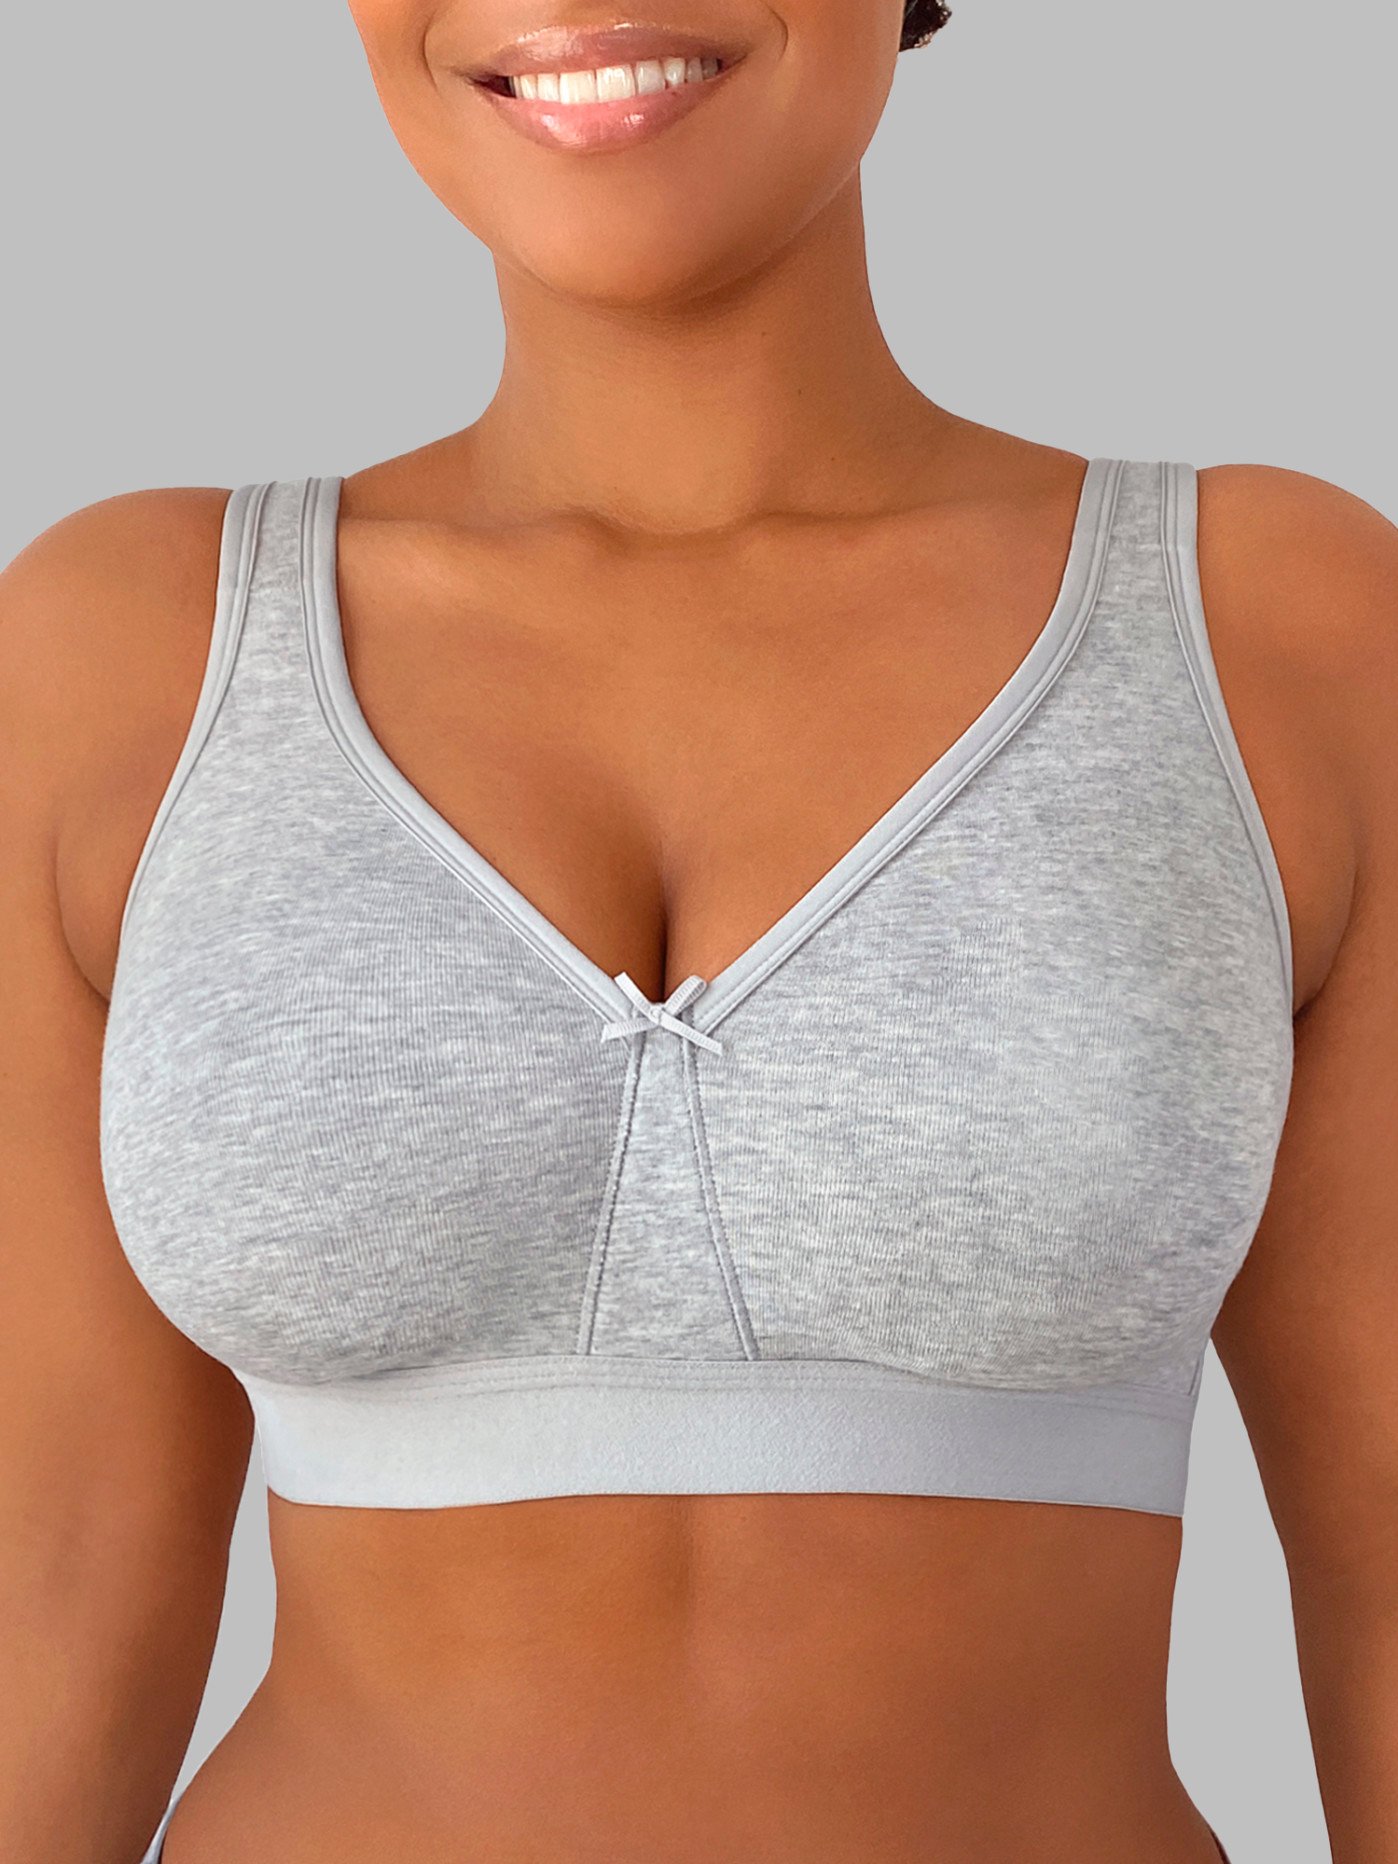 Fuller Figure Firm Support Wirefree Bra - Black